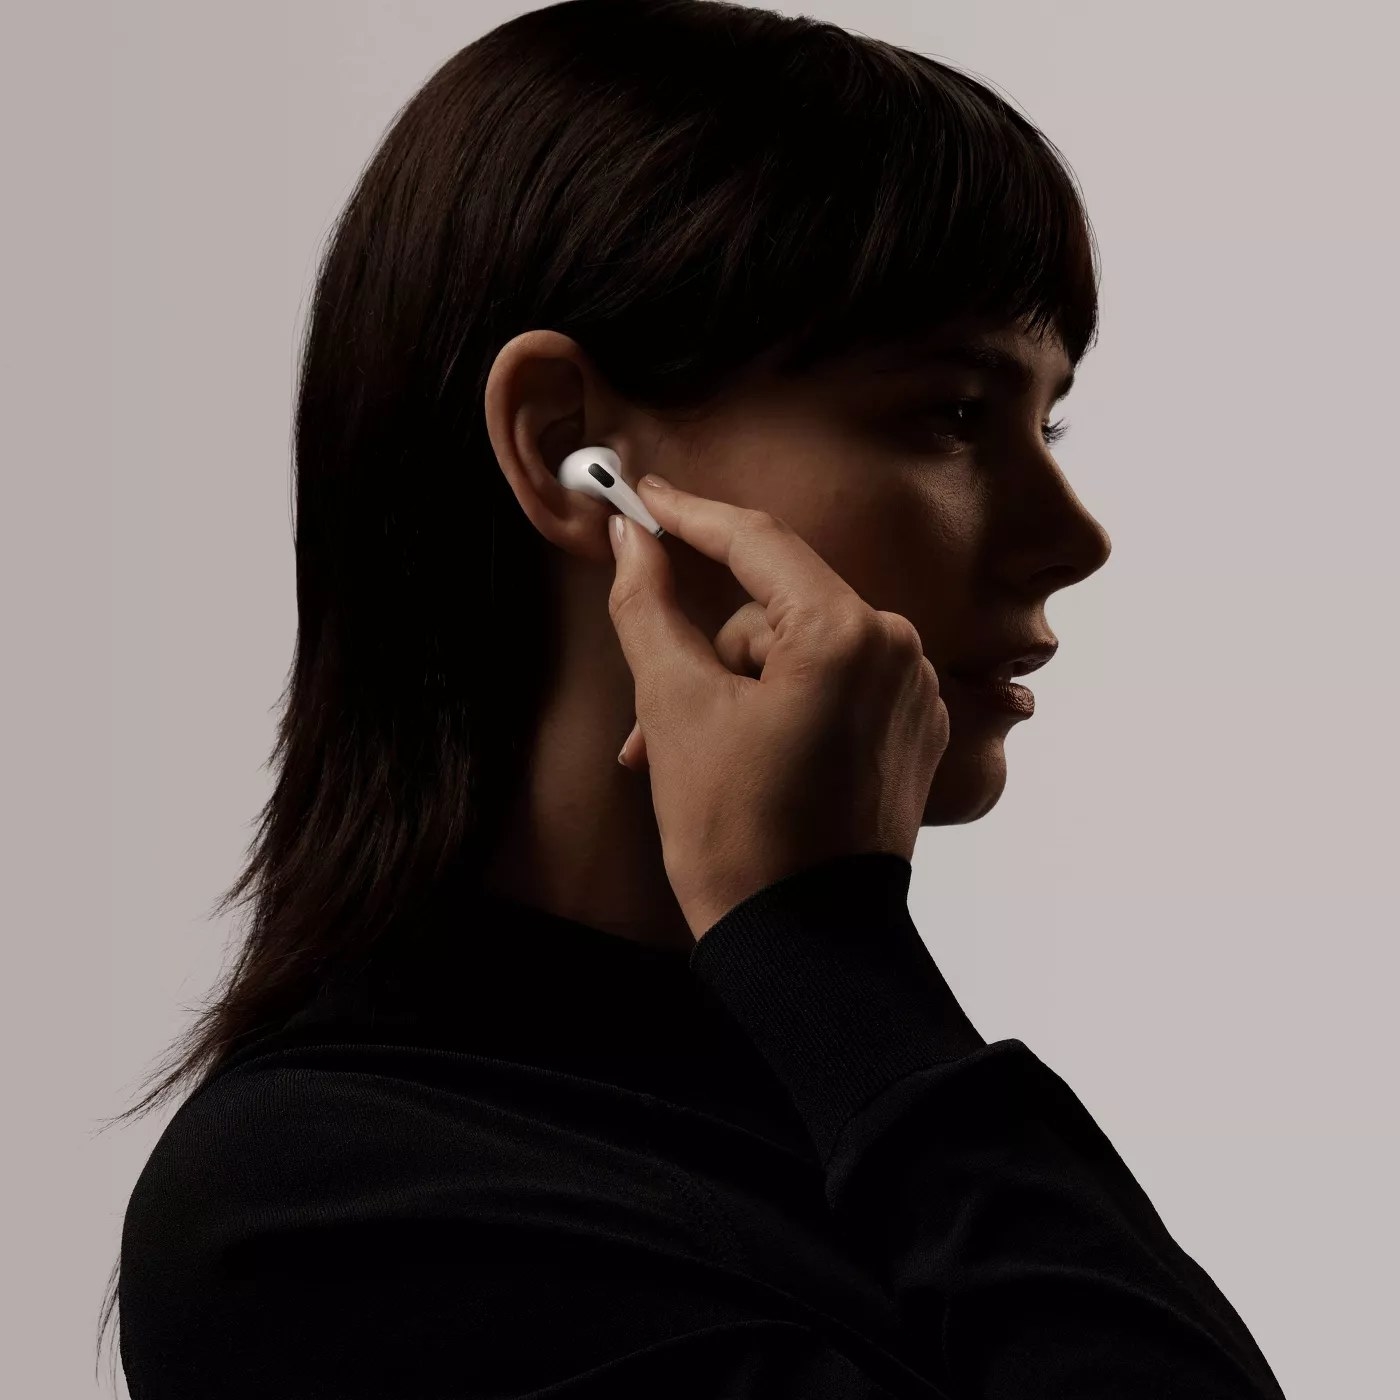 A model inserting an earbud